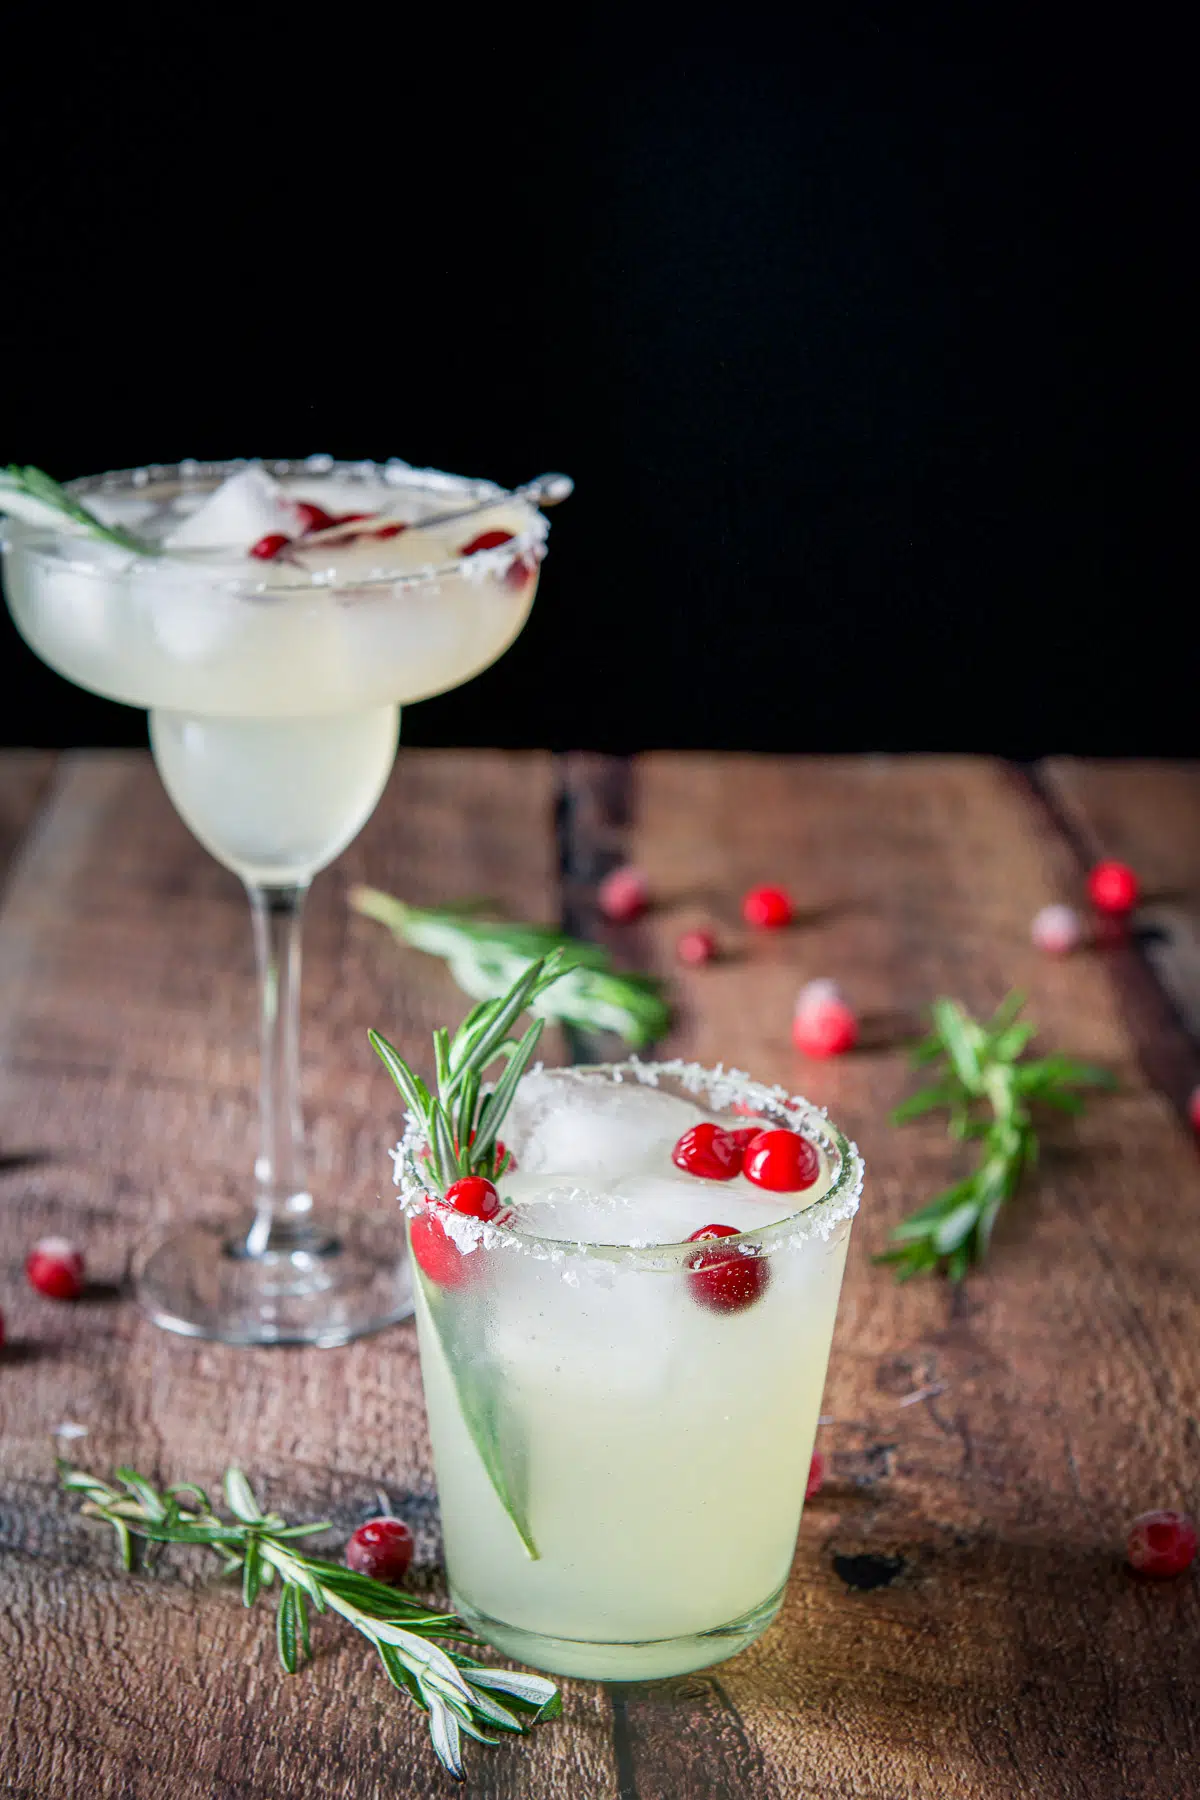 A short glass in front of the classic glass, both filled with the margarita. Cranberries and rosemary are the garnish